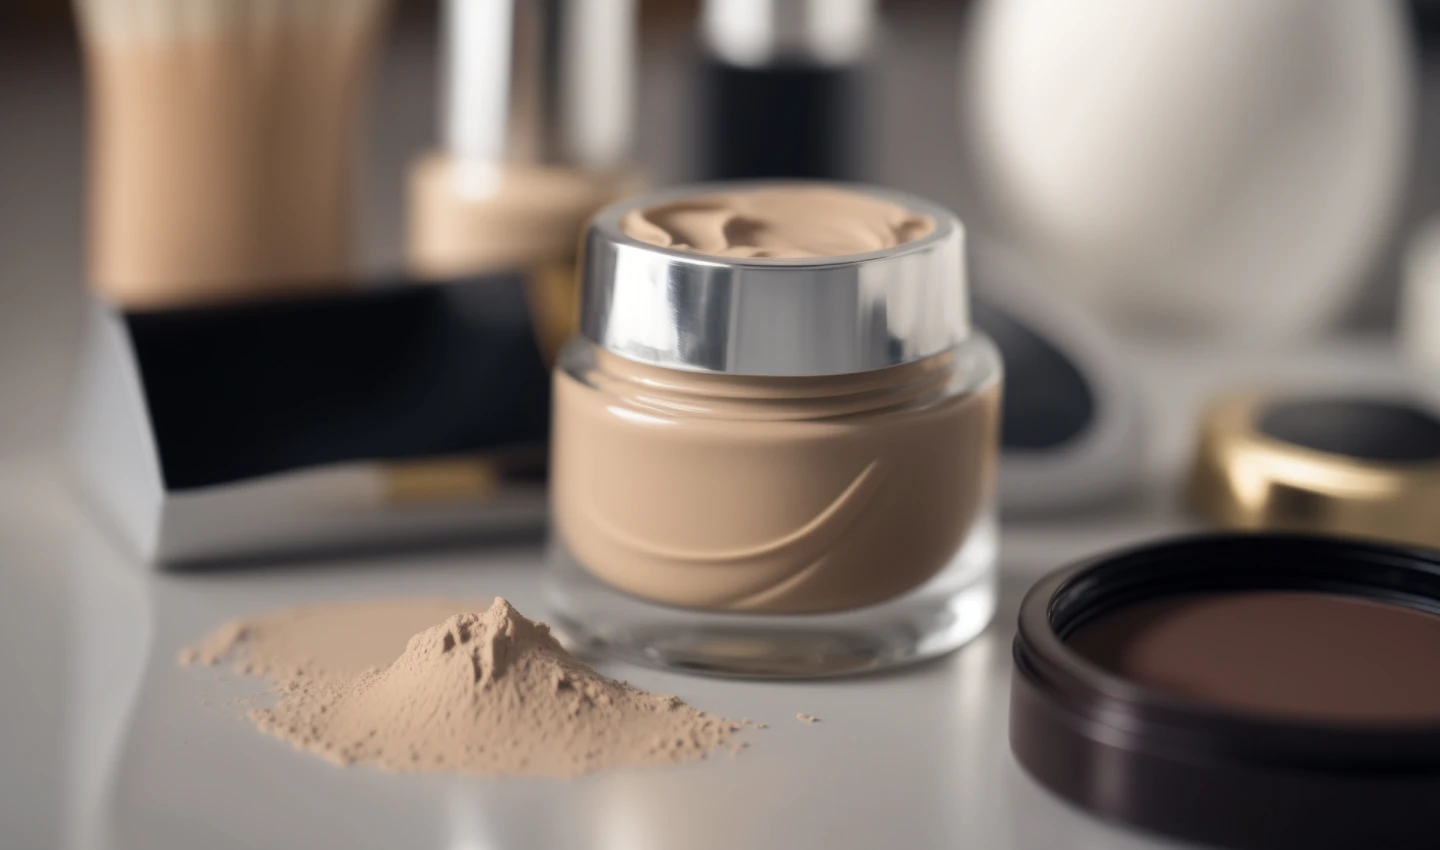 All-Day Foundation: A container filled with concealer and a hint of face powder